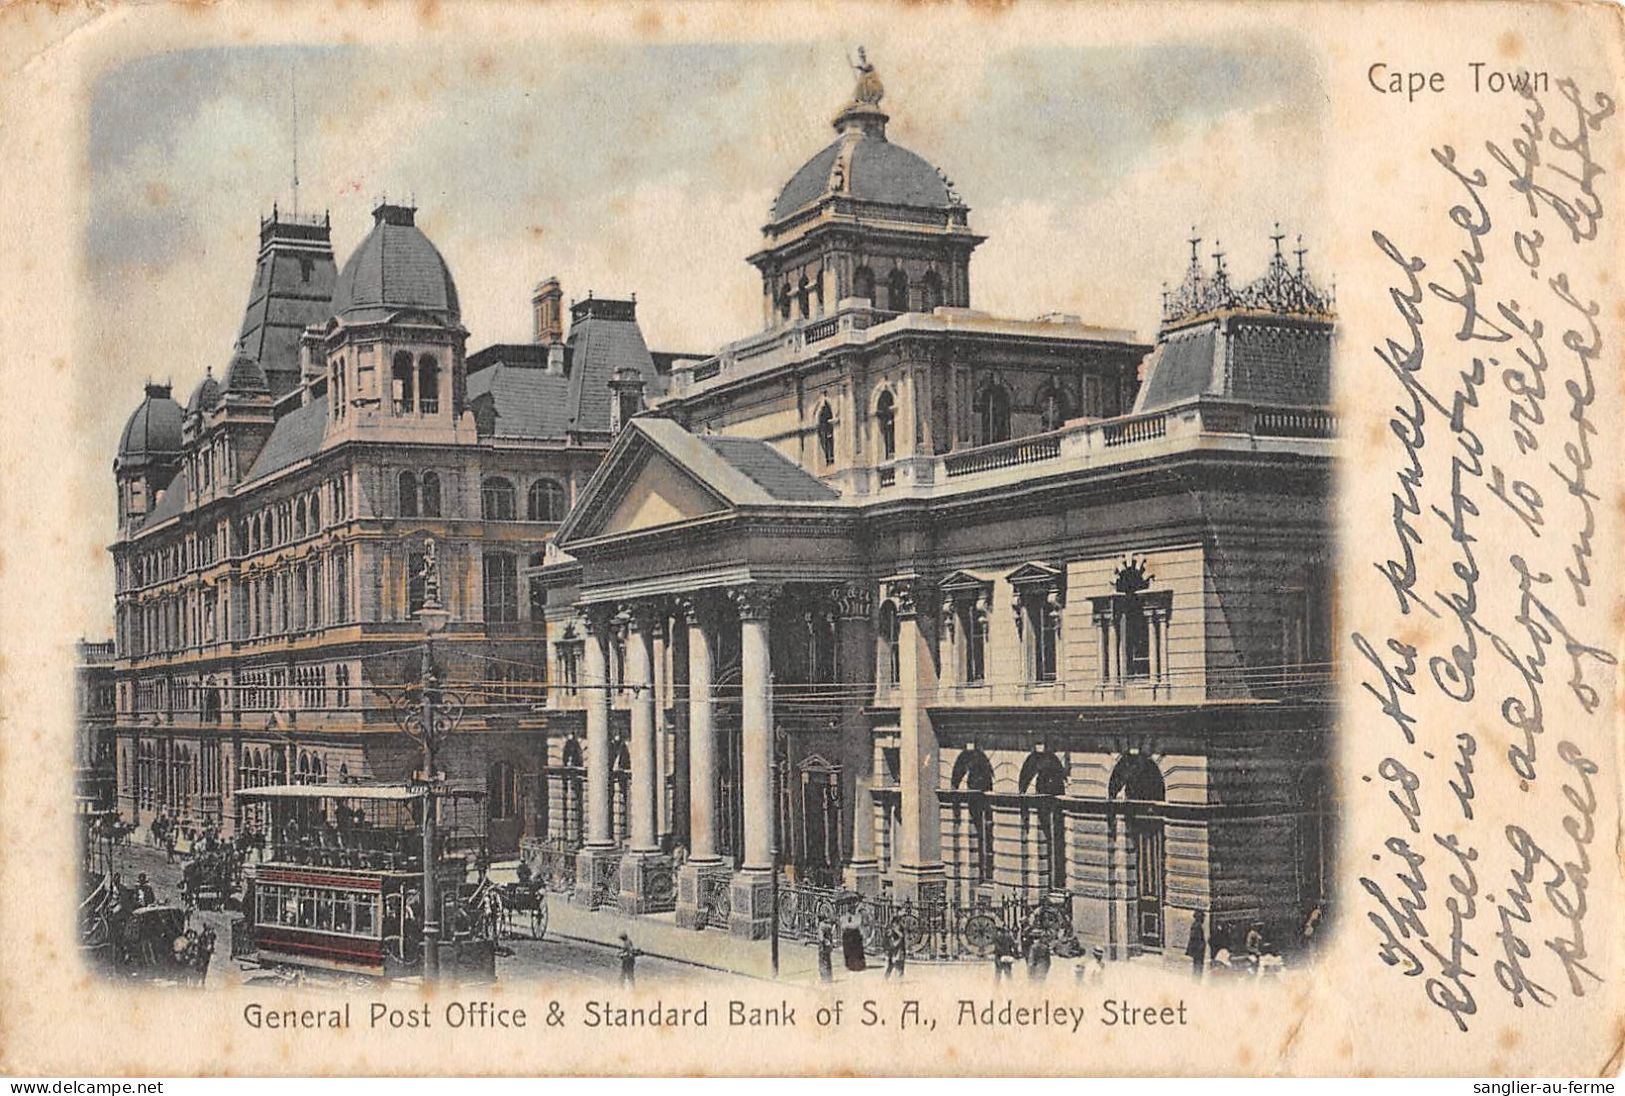 CPA / AFRIQUE DU SUD / GENERAL POST OFFICE AND STANDARS BANK OF S.A. / ADDERLEY STREET / CAPE TOWN - Südafrika